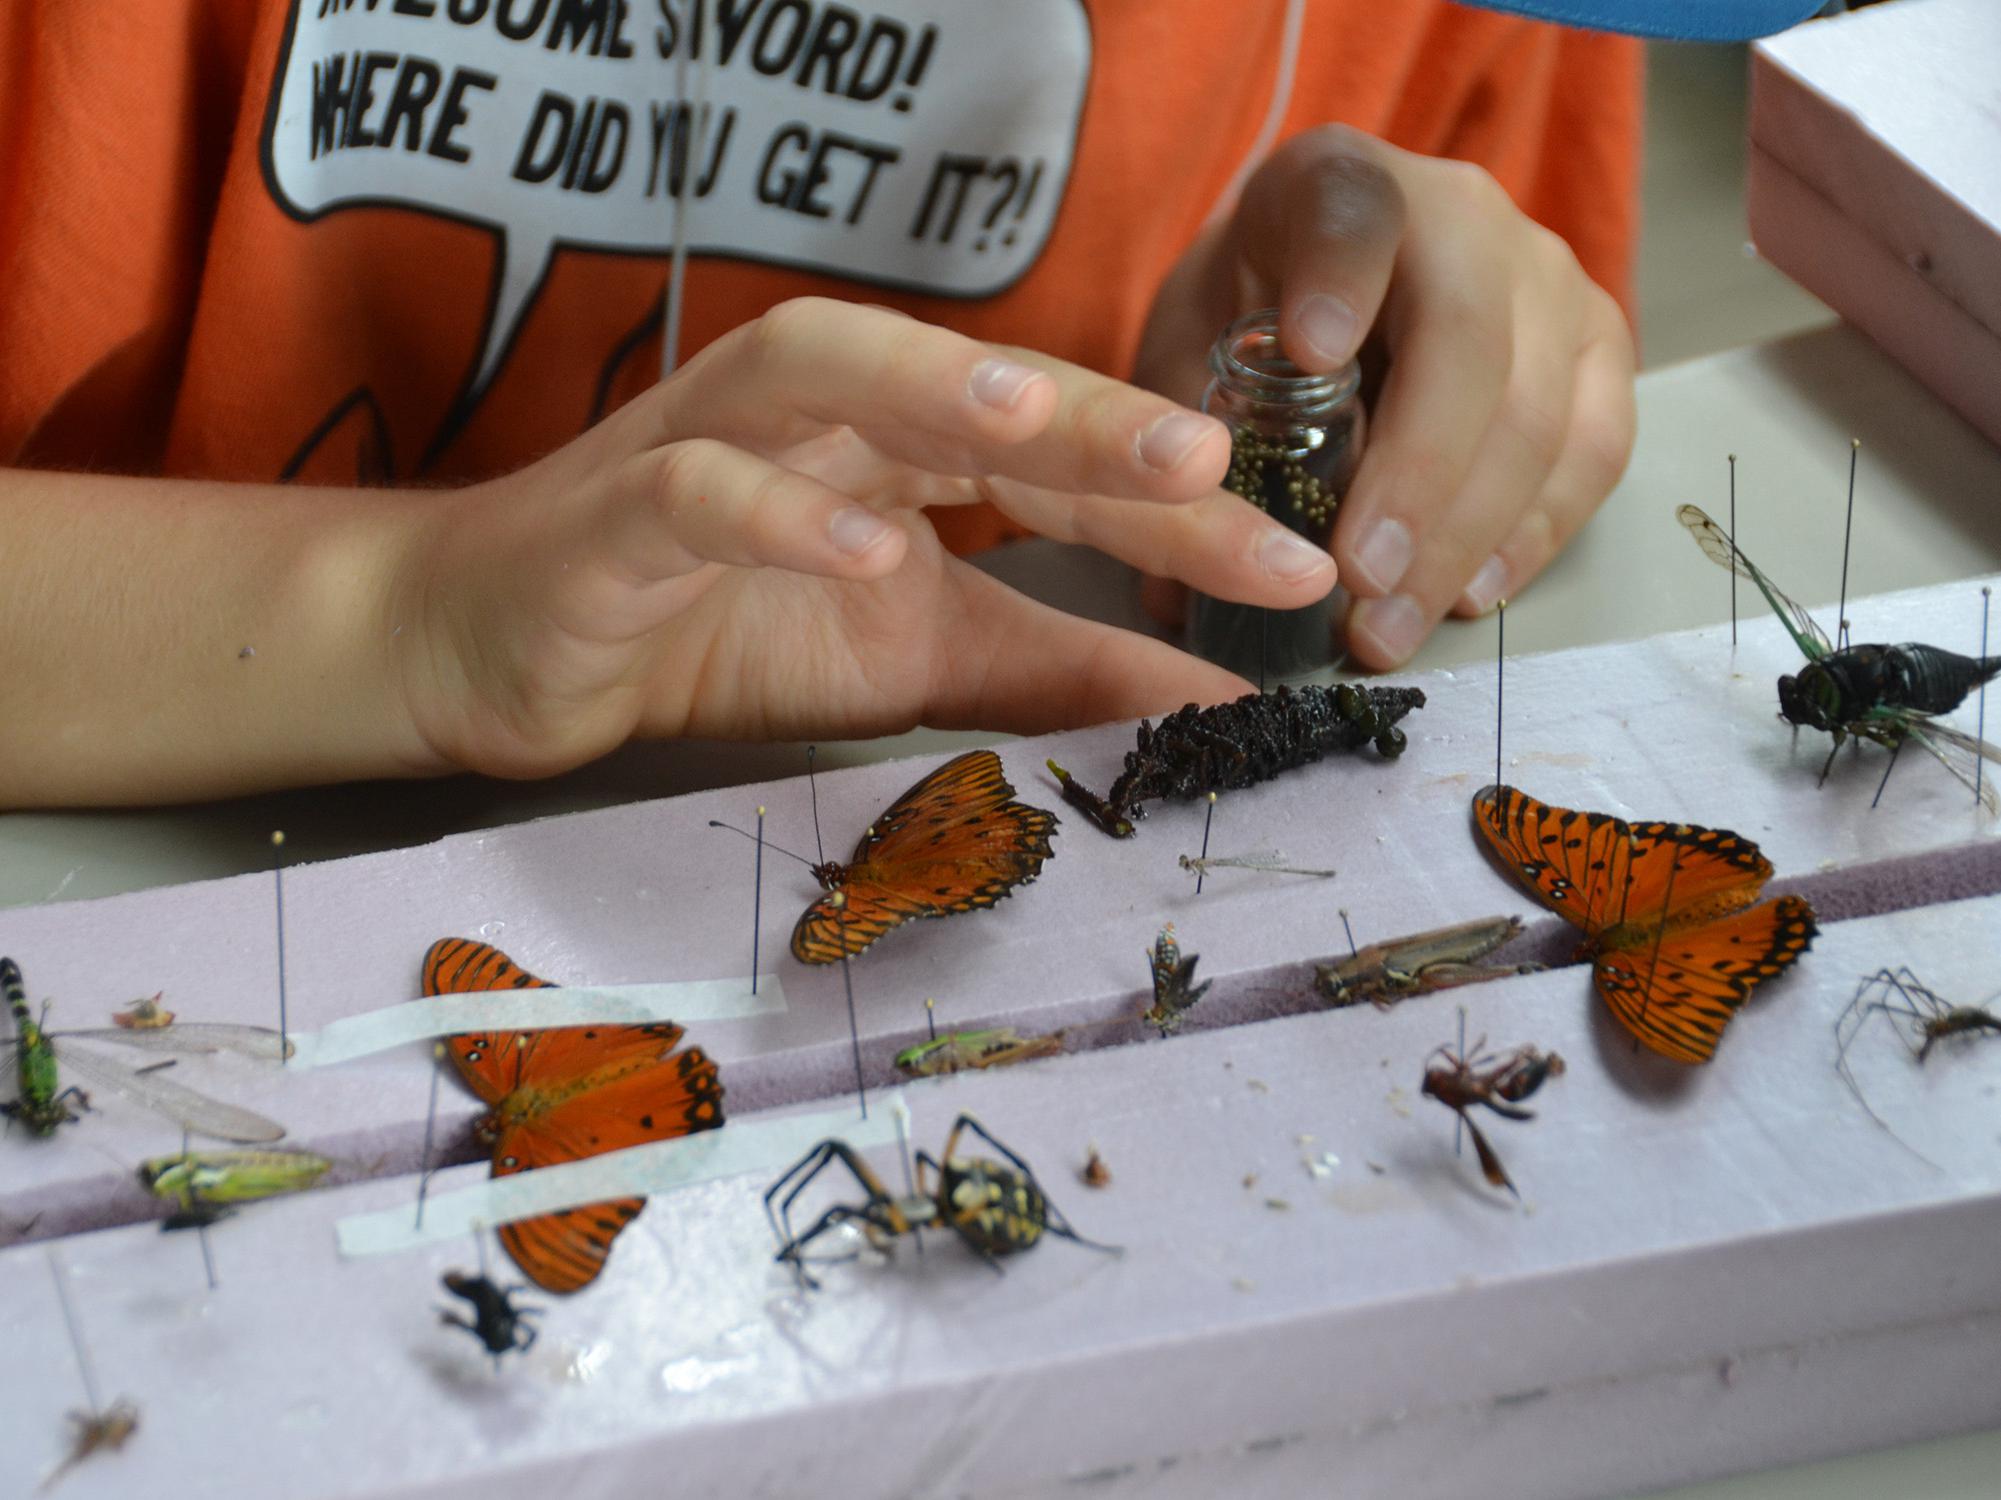 A child’s hands poised above a collection of colorful insect specimens, pinned to Styrofoam blocks.